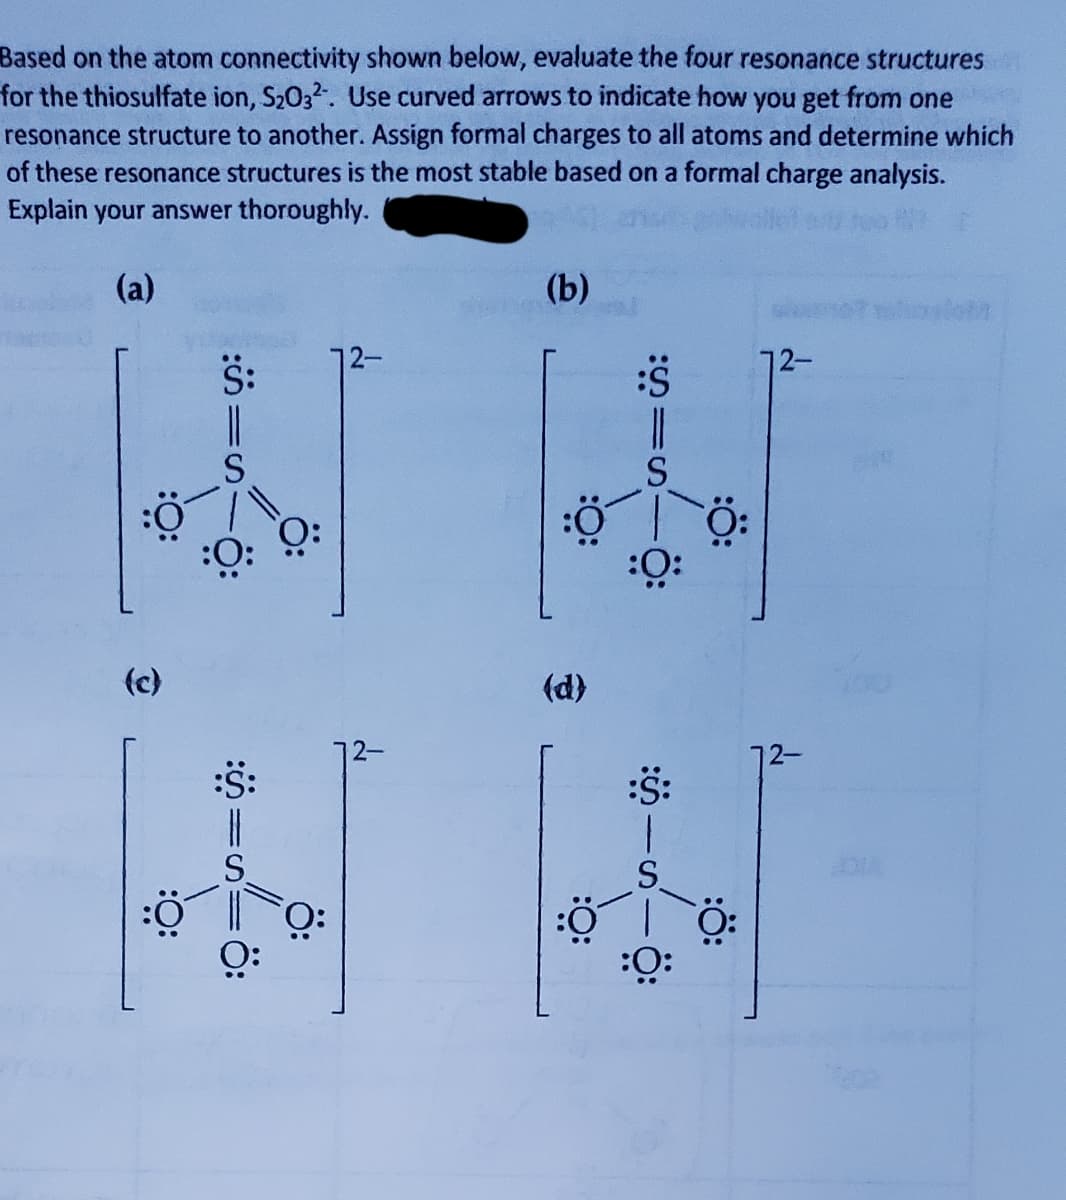 Based on the atom connectivity shown below, evaluate the four resonance structures
for the thiosulfate ion, S2032. Use curved arrows to indicate how you get from one
resonance structure to another. Assign formal charges to all atoms and determine which
of these resonance structures is the most stable based on a formal charge analysis.
Explain your answer thoroughly.
(a)
(b)
S:
72-
72-
(c)
(d)
2-
2-
:S:
S.
O:
:ö:
